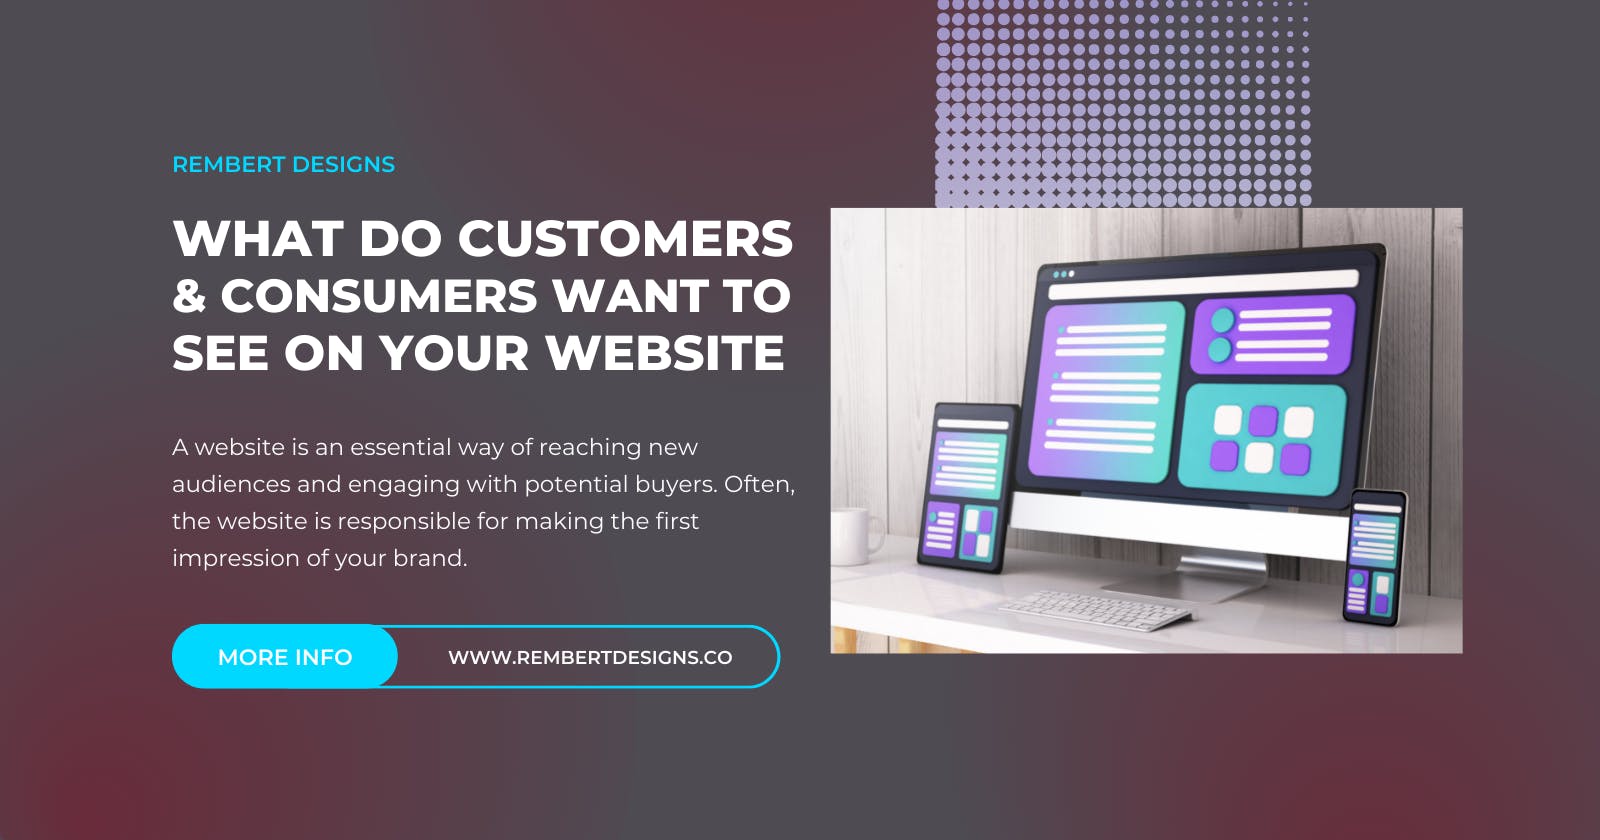 What Do Customers & Consumers Want to See on Your Website?